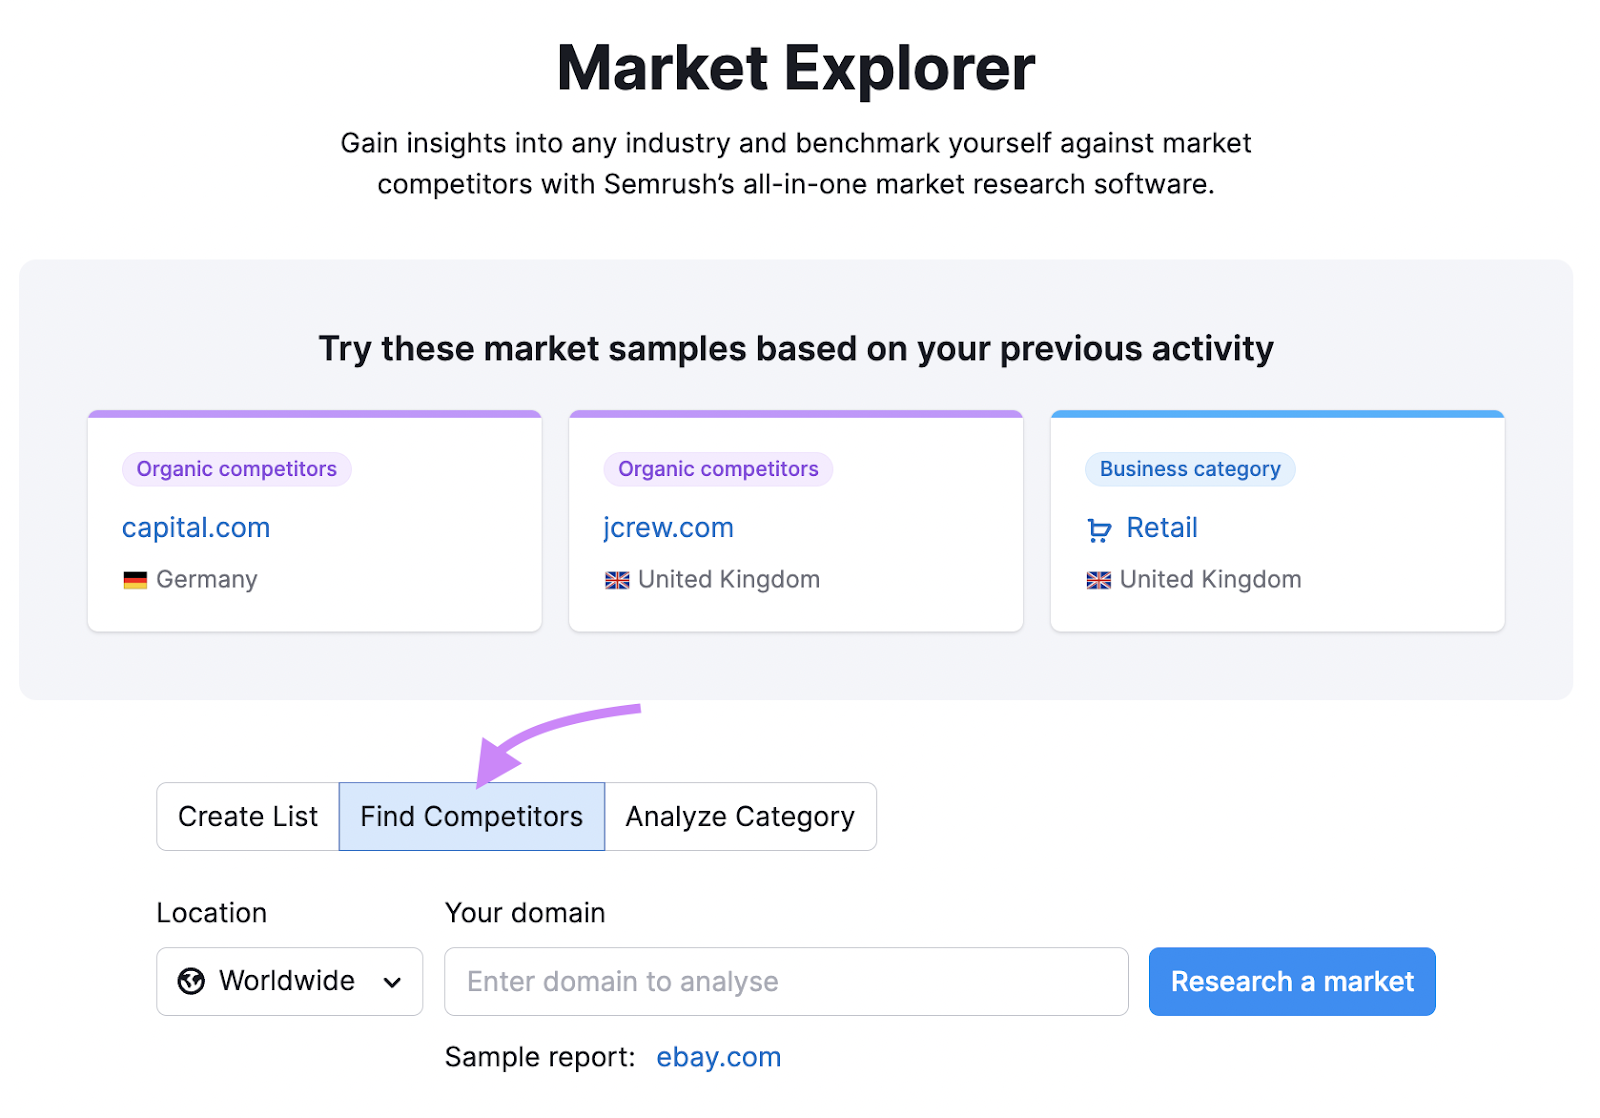 “Find Competitors” tab in Market Explorer tool